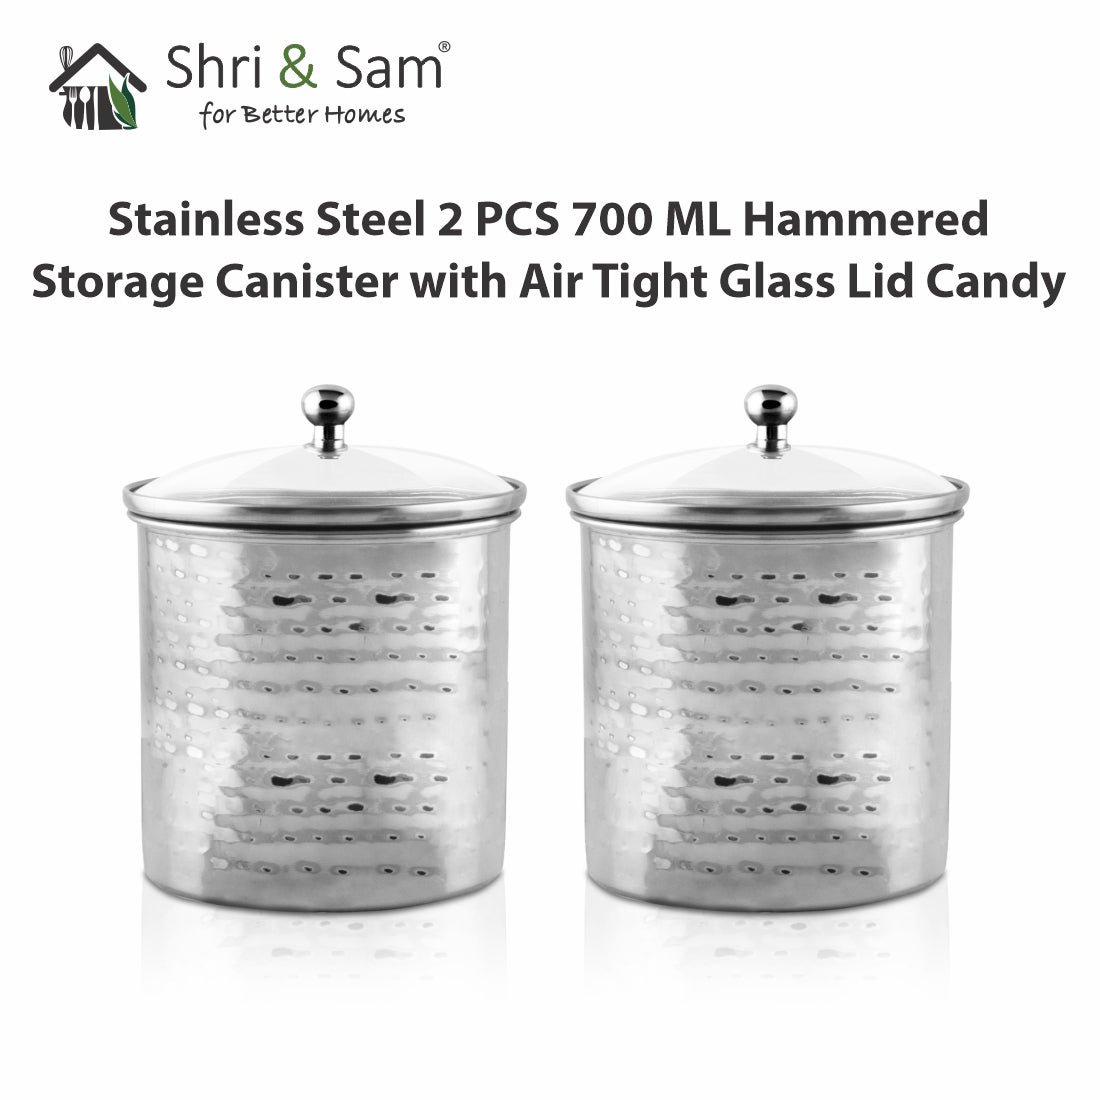 Stainless Steel 2 PCS 700 ML Hammered Storage Canister with Air Tight Glass Lid Candy